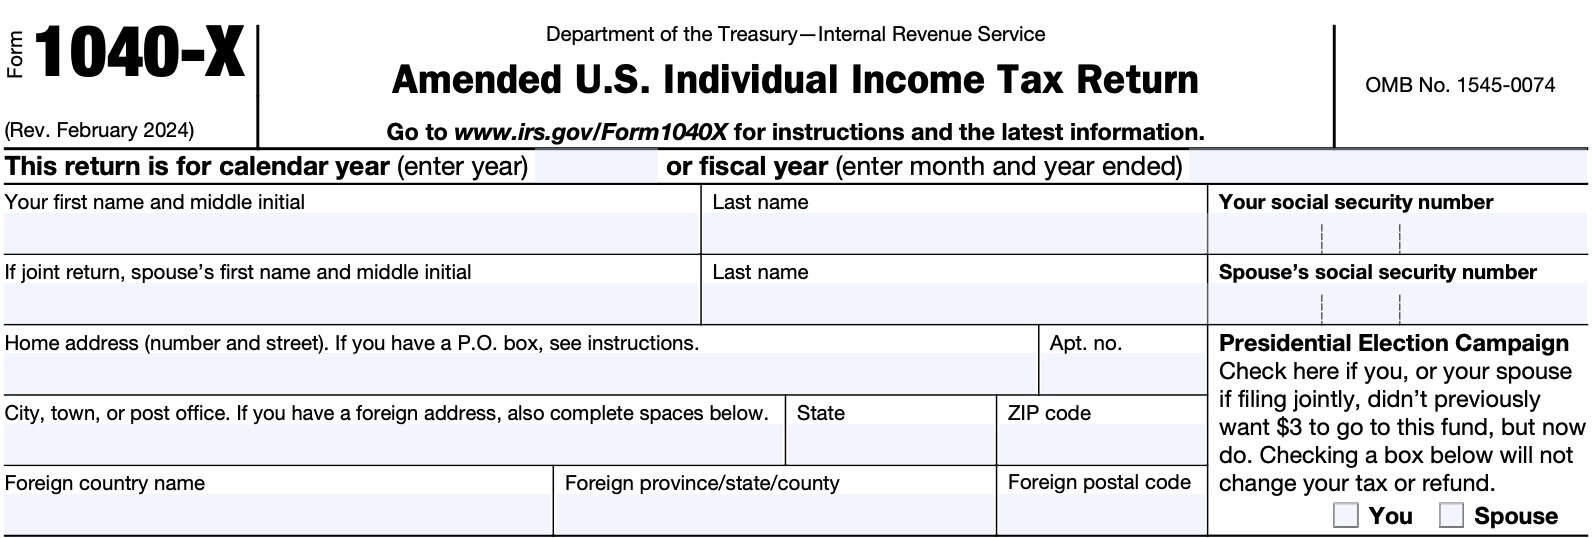 irs form 1040-x, taxpayer information